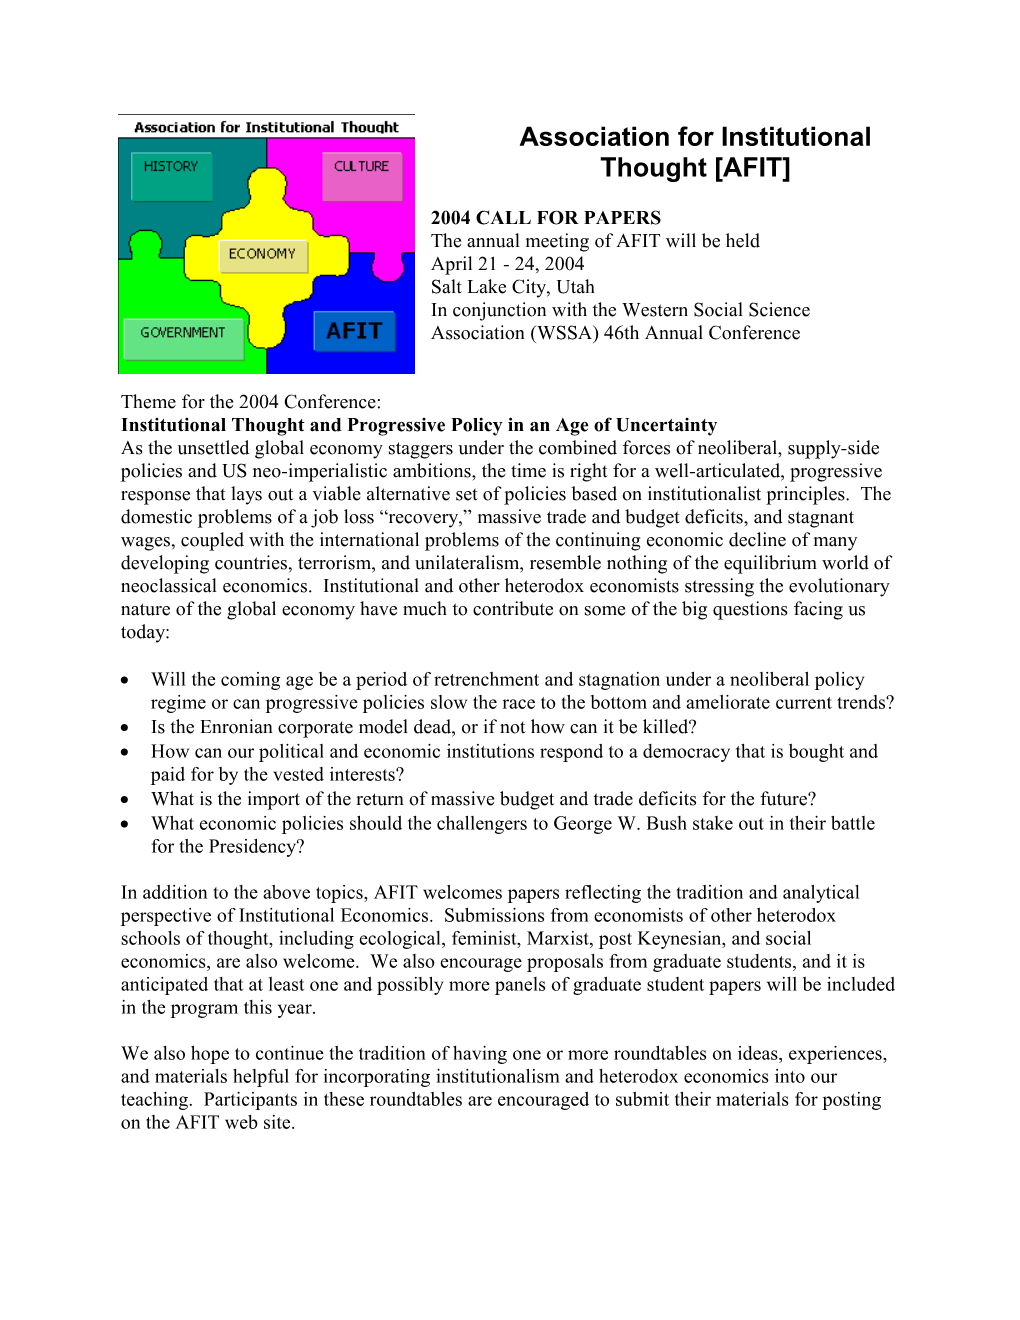 Association for Institutional Thought AFIT